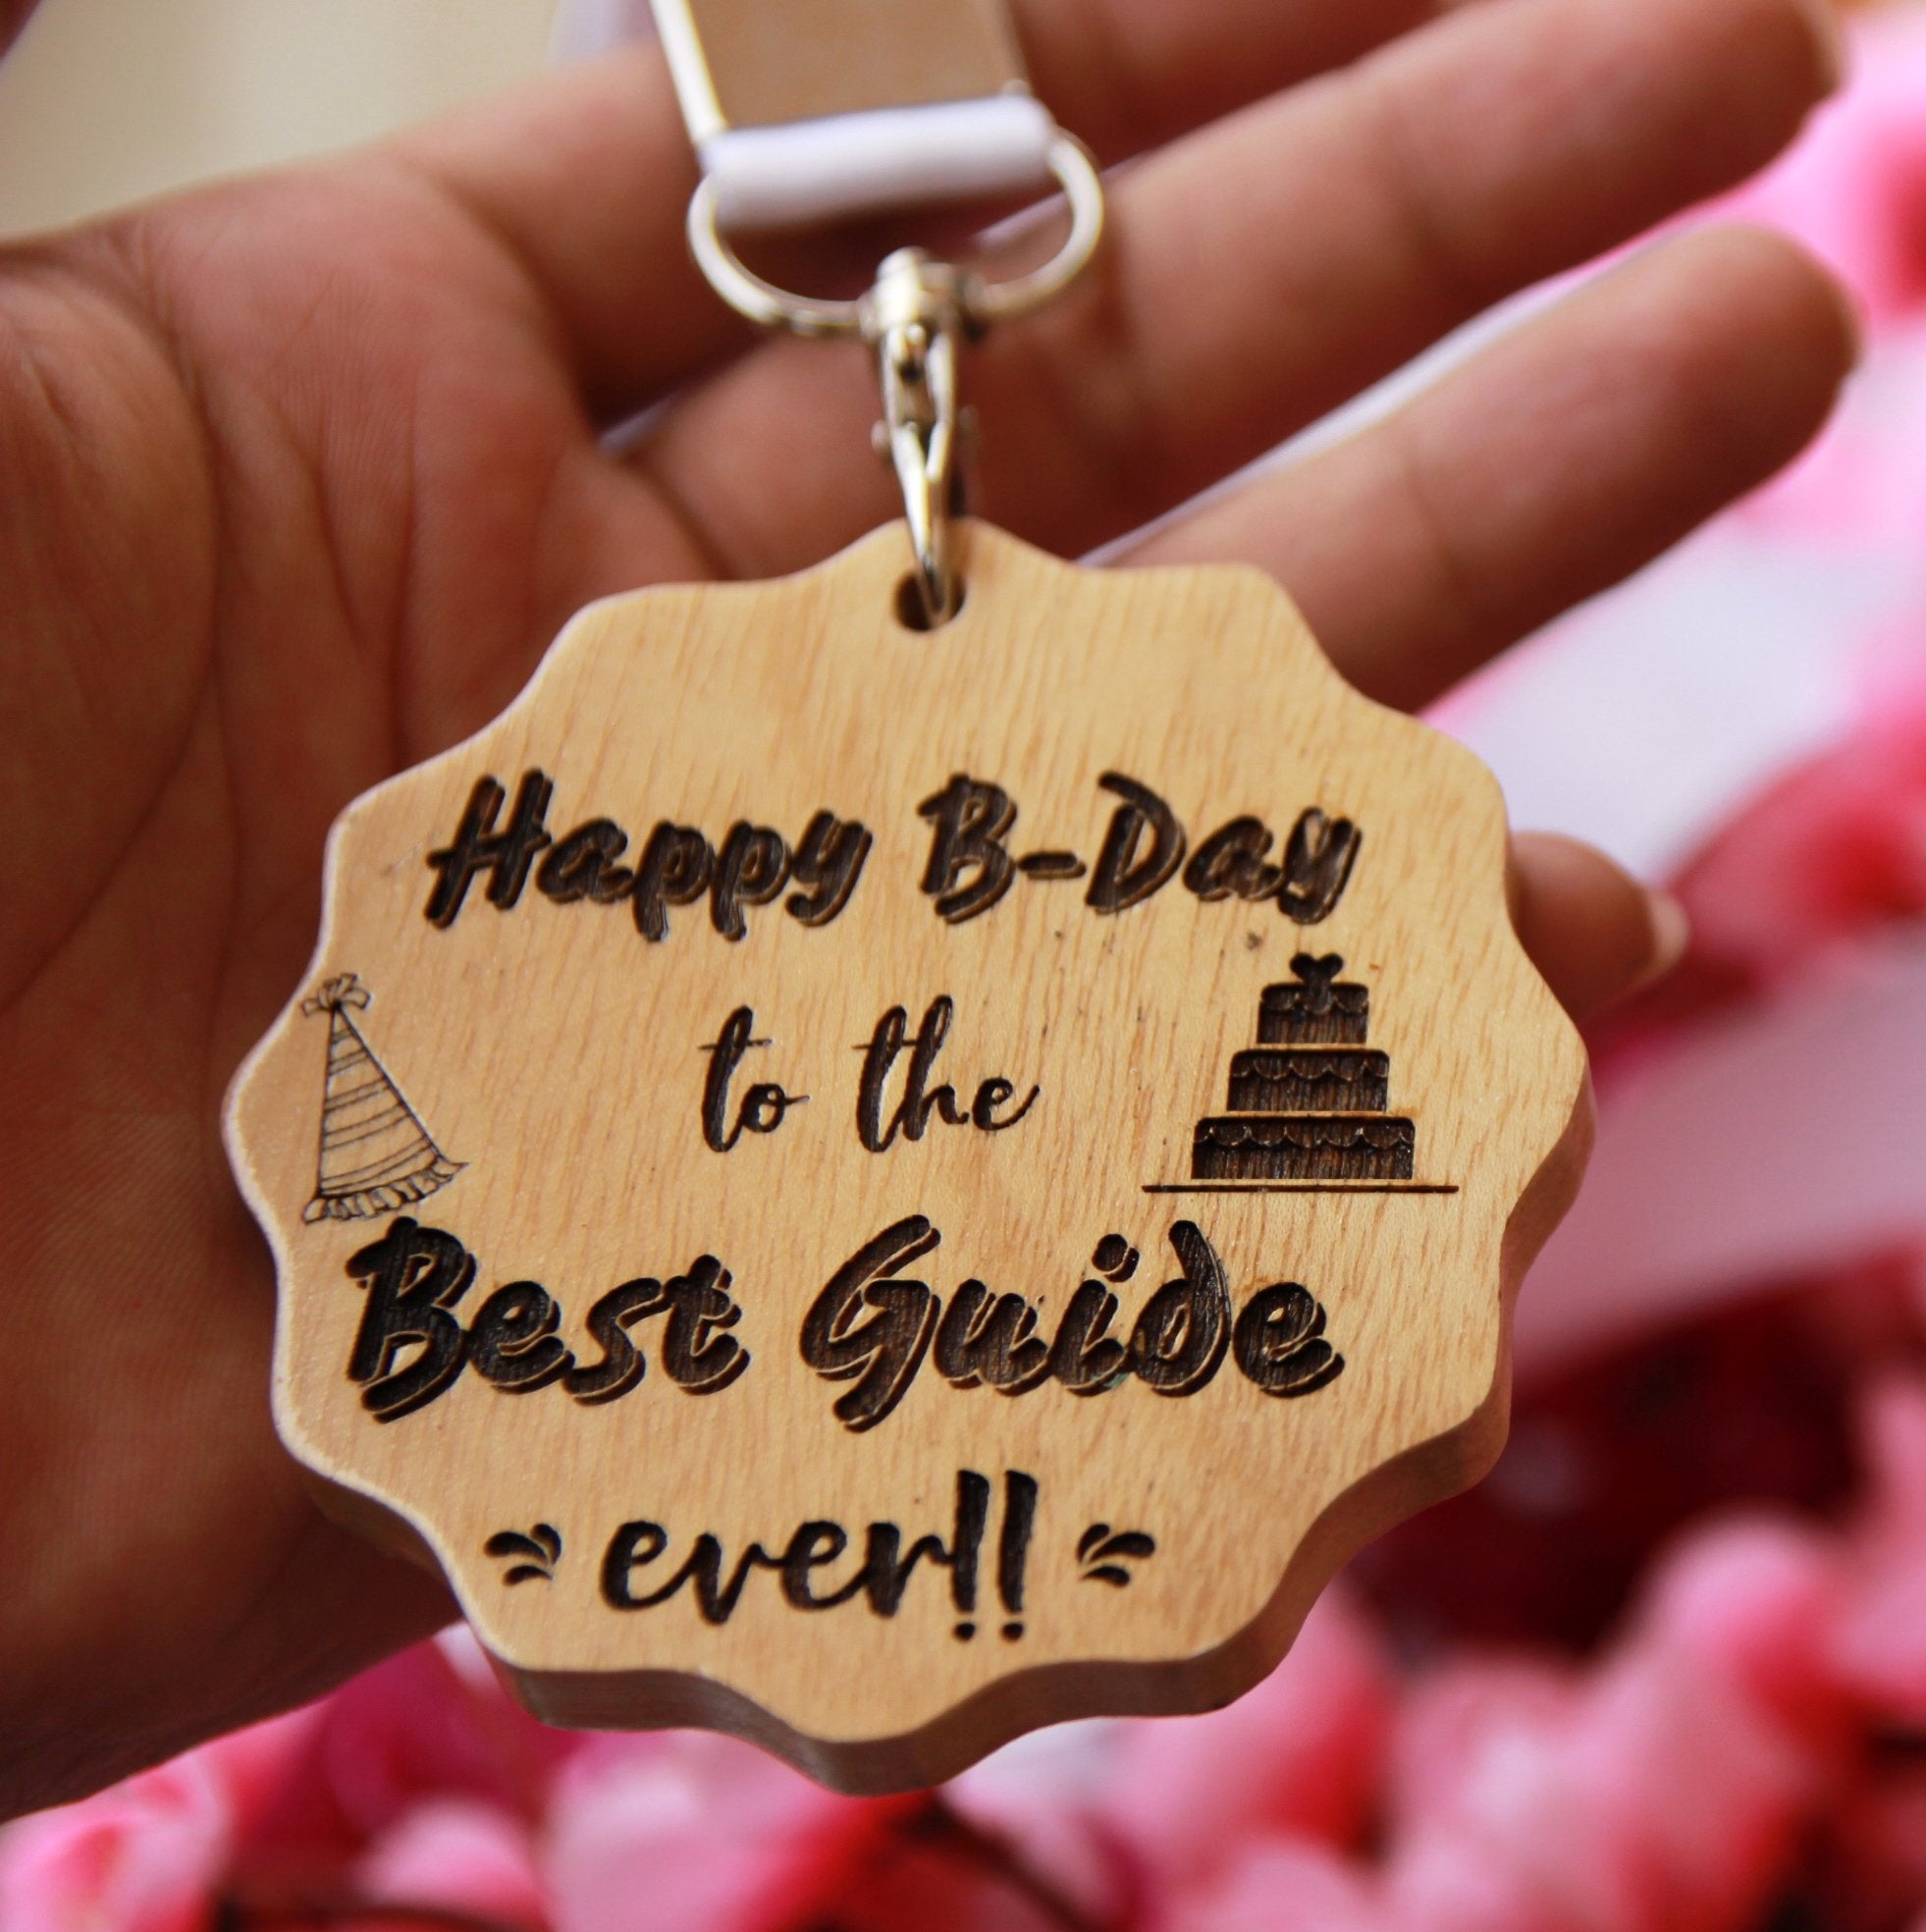 Customized Wooden Birthday Medal For Teacher. This Engraved Medal Makes The Best Birthday Gifts For Teachers. Buy More Personalized Gifts For Teachers Online From The Woodgeek Store.